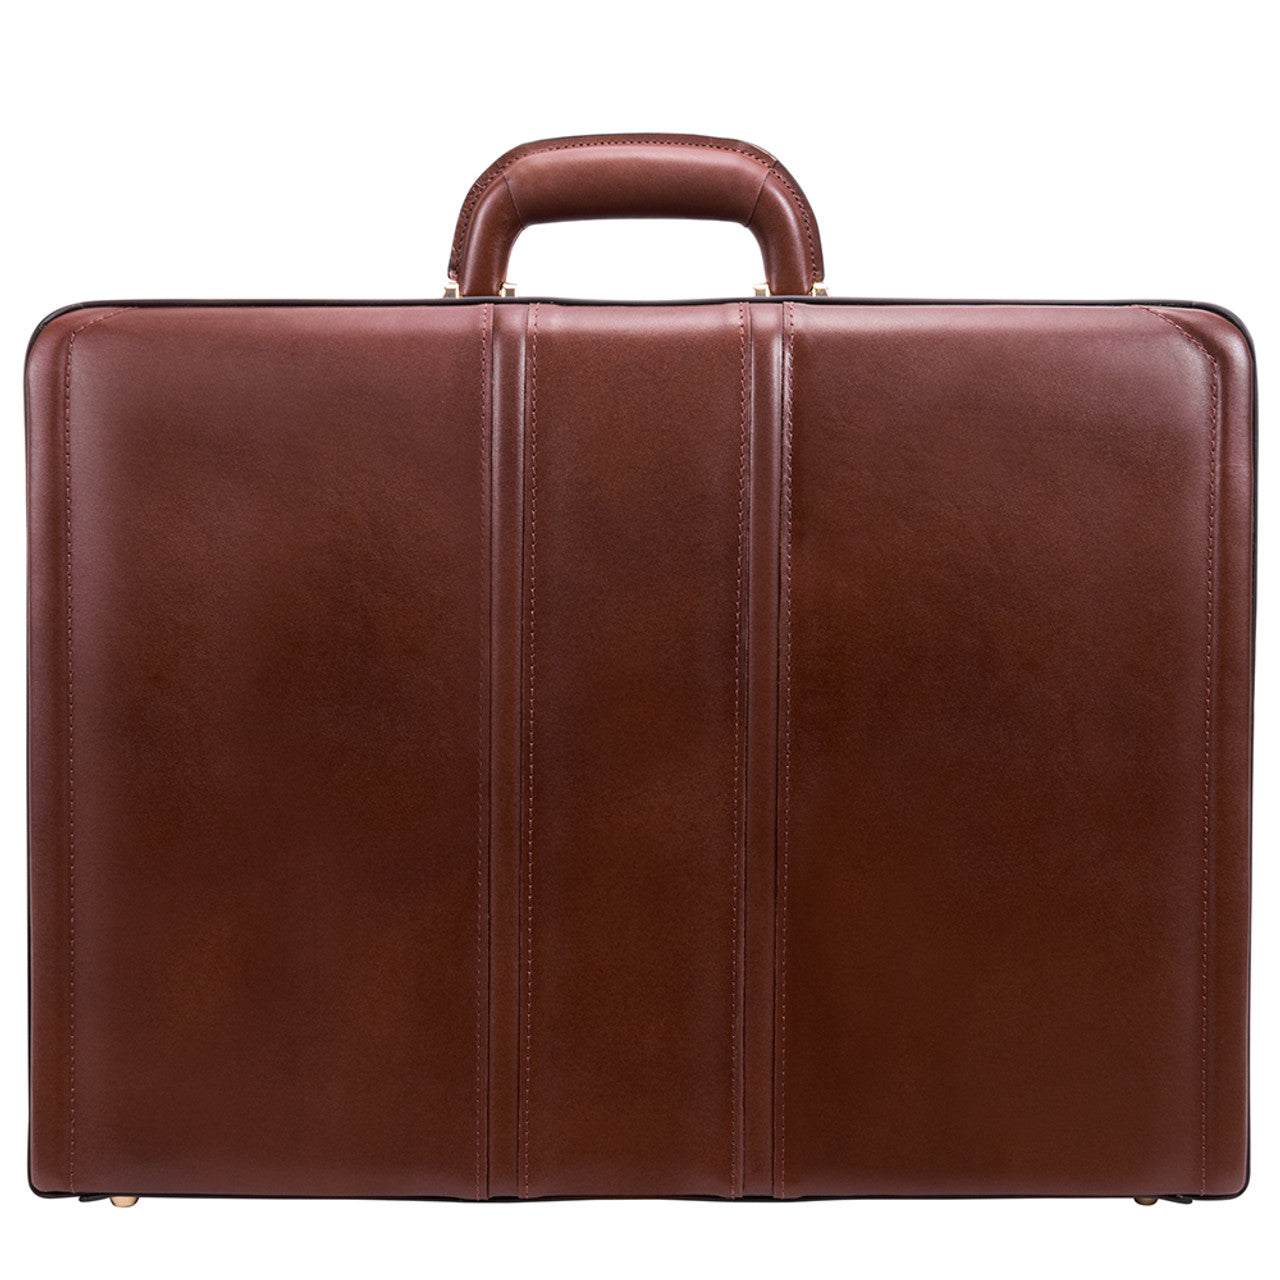 Coughlin Leather Expandable Attache Case - Leather Loom